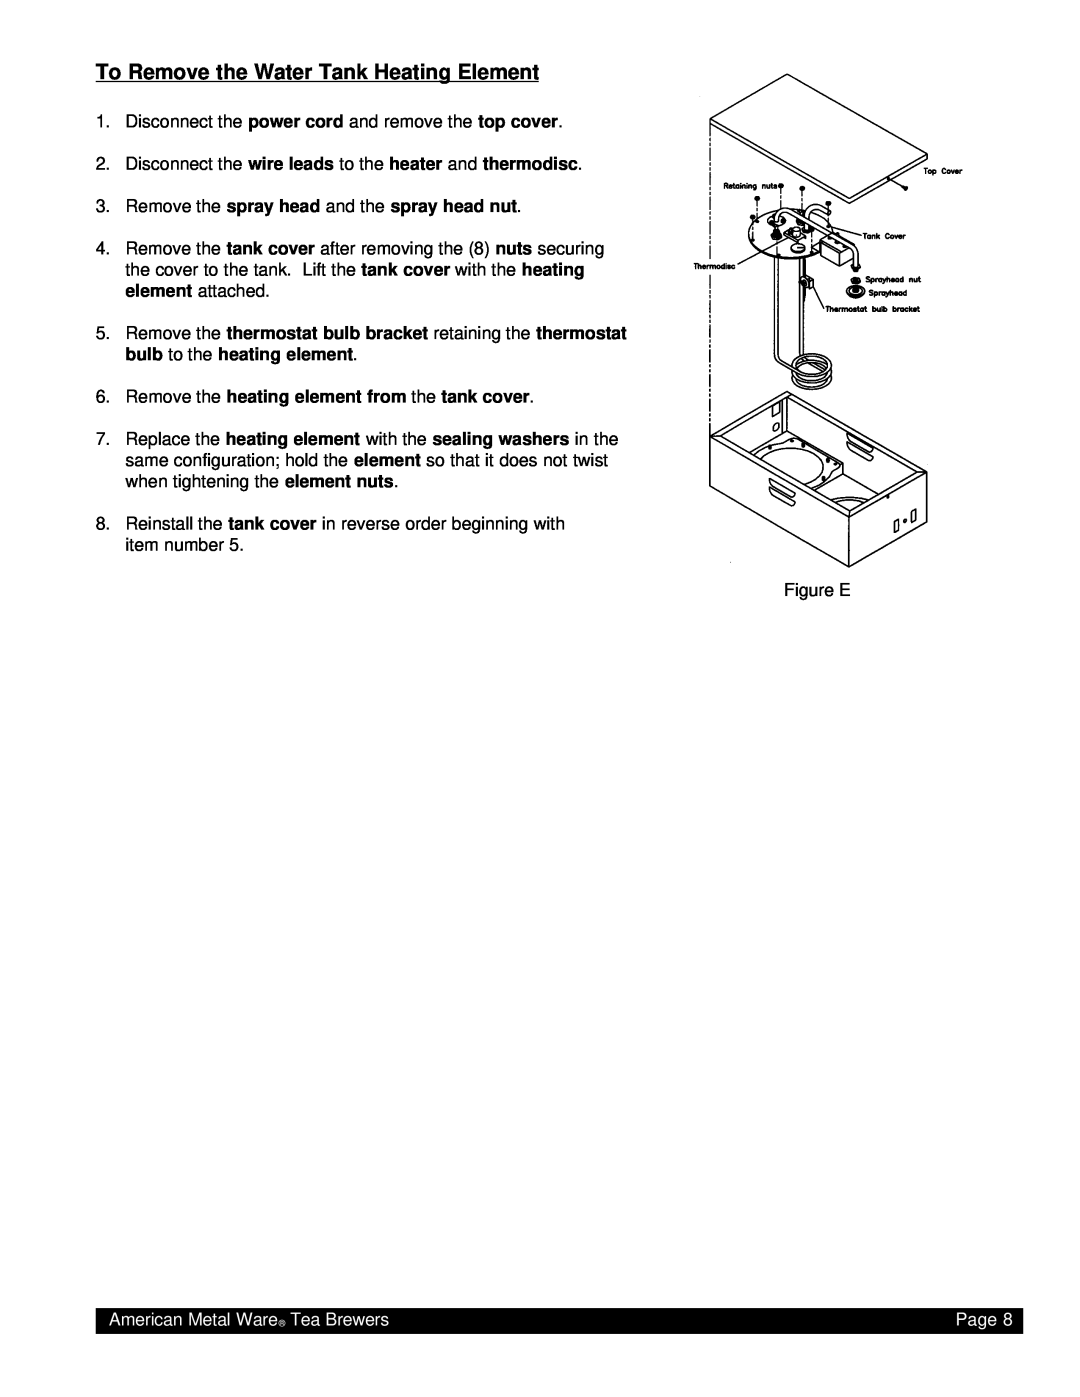 Grindmaster TEA-300 instruction manual To Remove the Water Tank Heating Element, American Metal Ware Tea Brewers, Page 